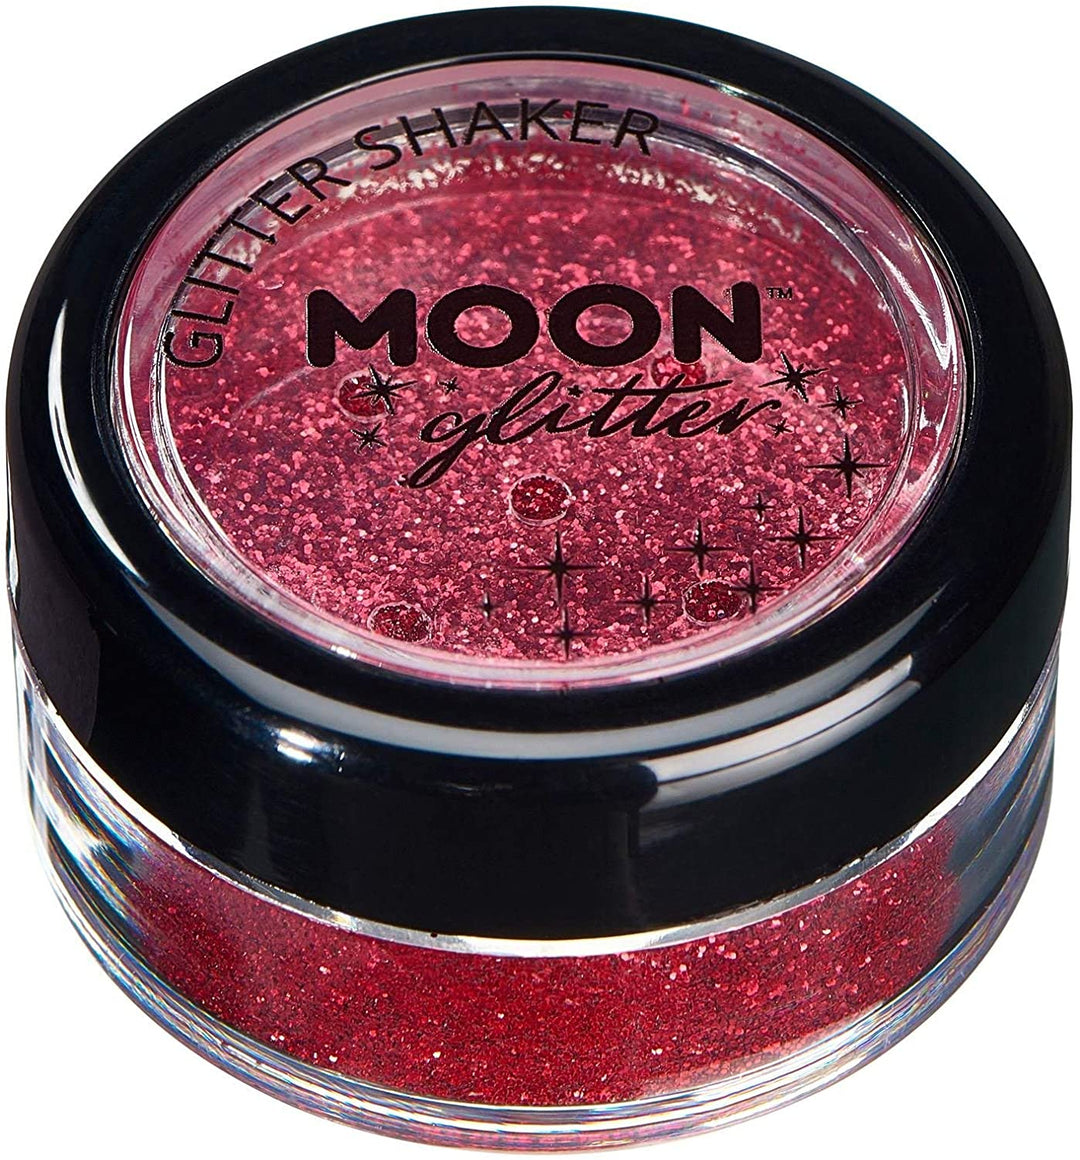 Classic Fine Glitter Shakers by Moon Glitter - Red - Cosmetic Festival Makeup Glitter for Face, Body, Nails, Hair, Lips - 5g